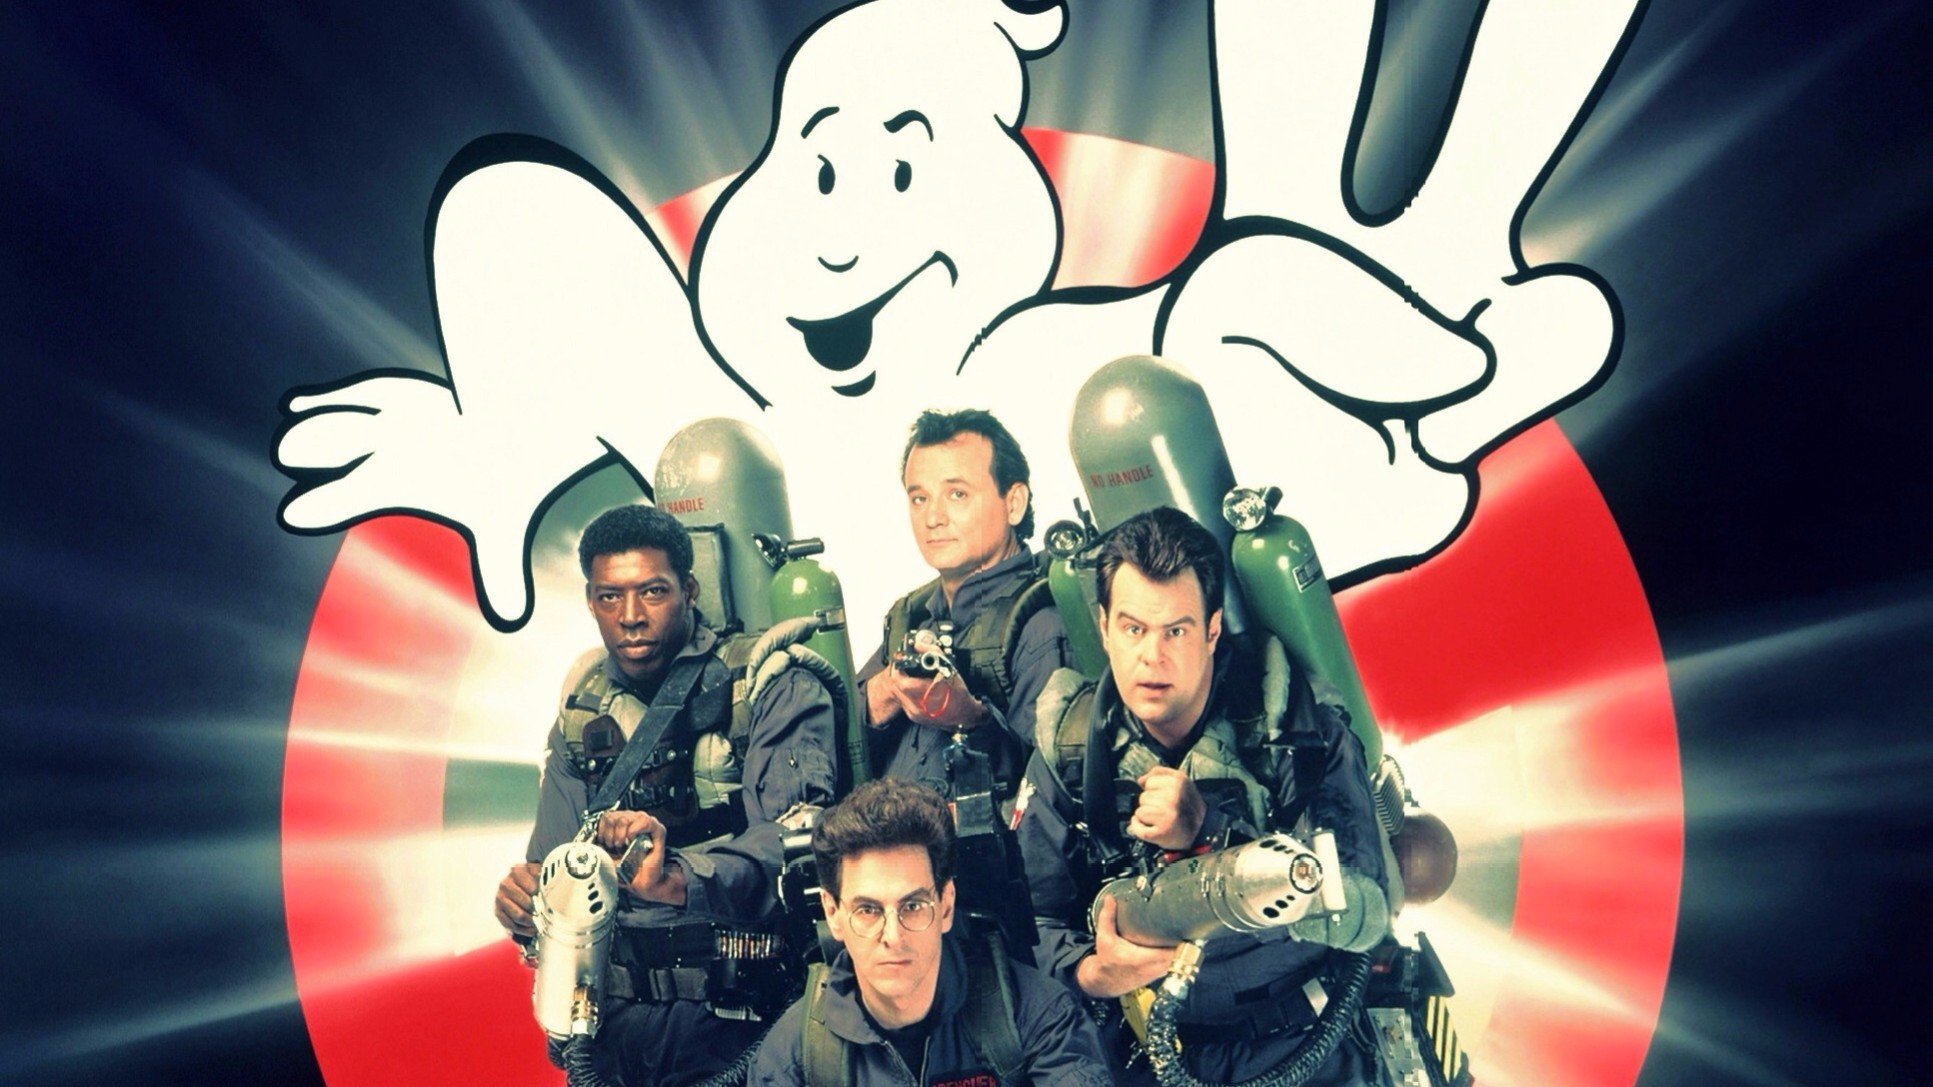 ANTI-MONITOR PODCAST: GHOSTBUSTERS 2